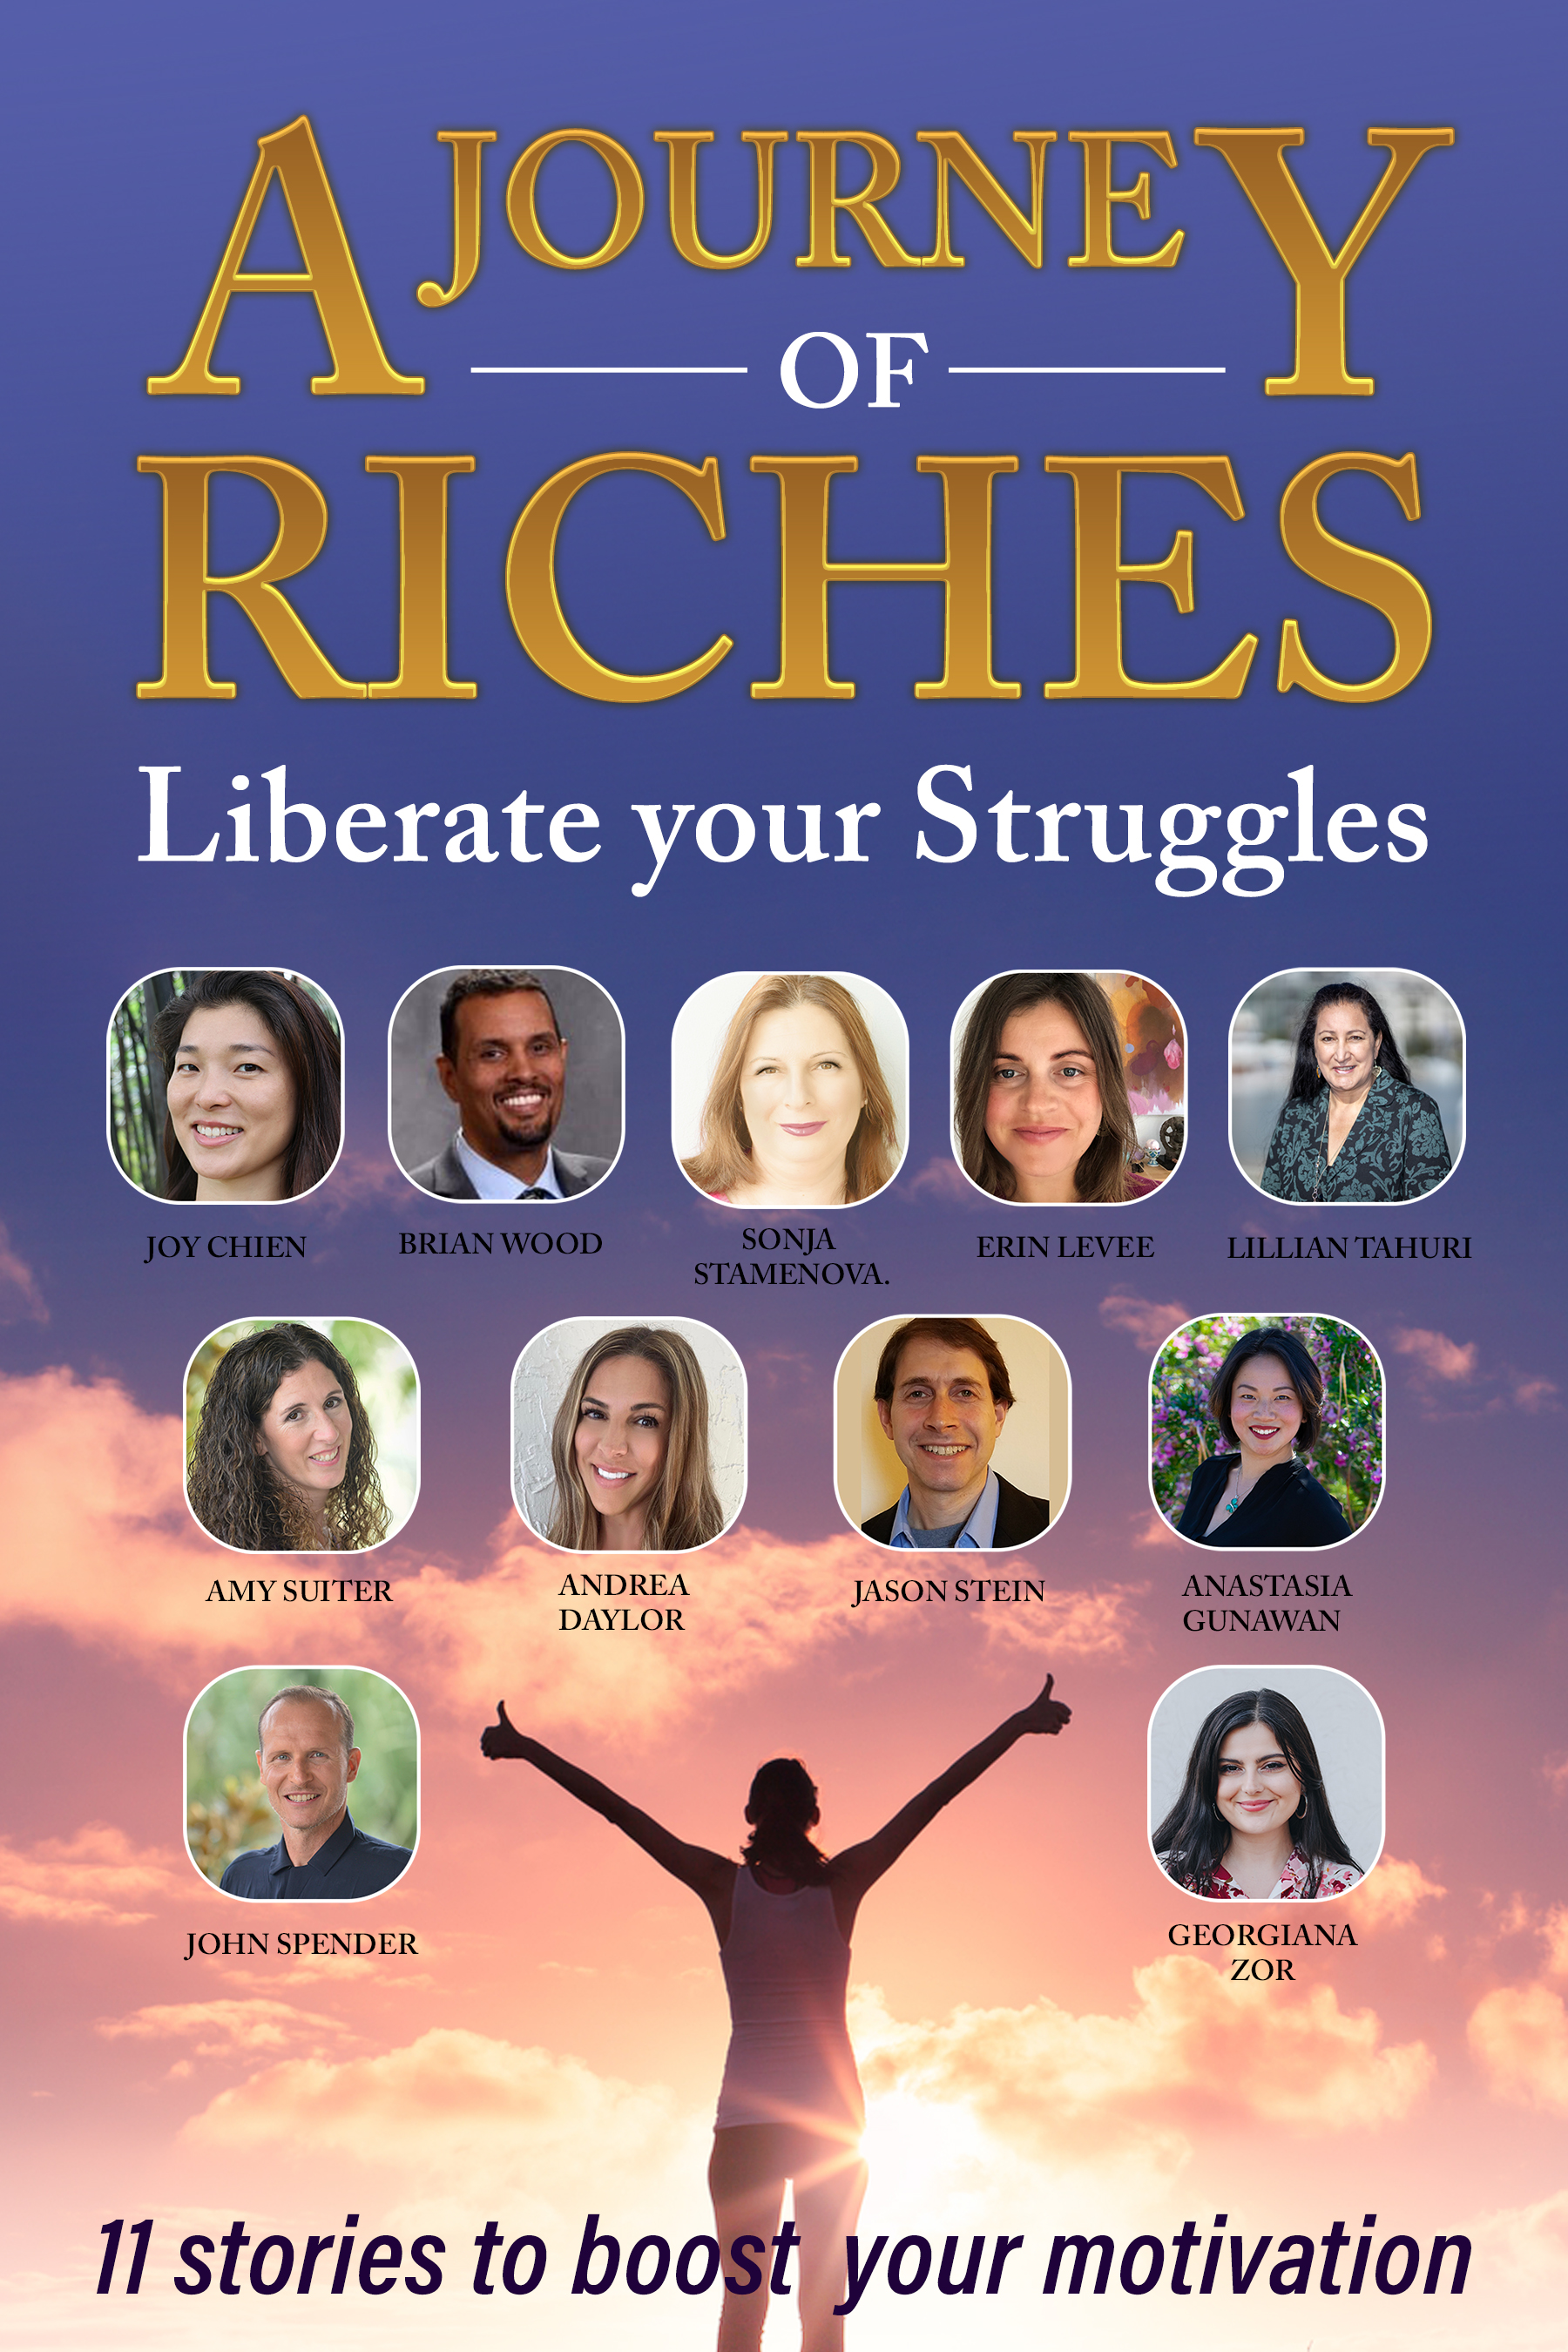 FREE: Liberate your Struggles: A Journey of Riches by John Spender